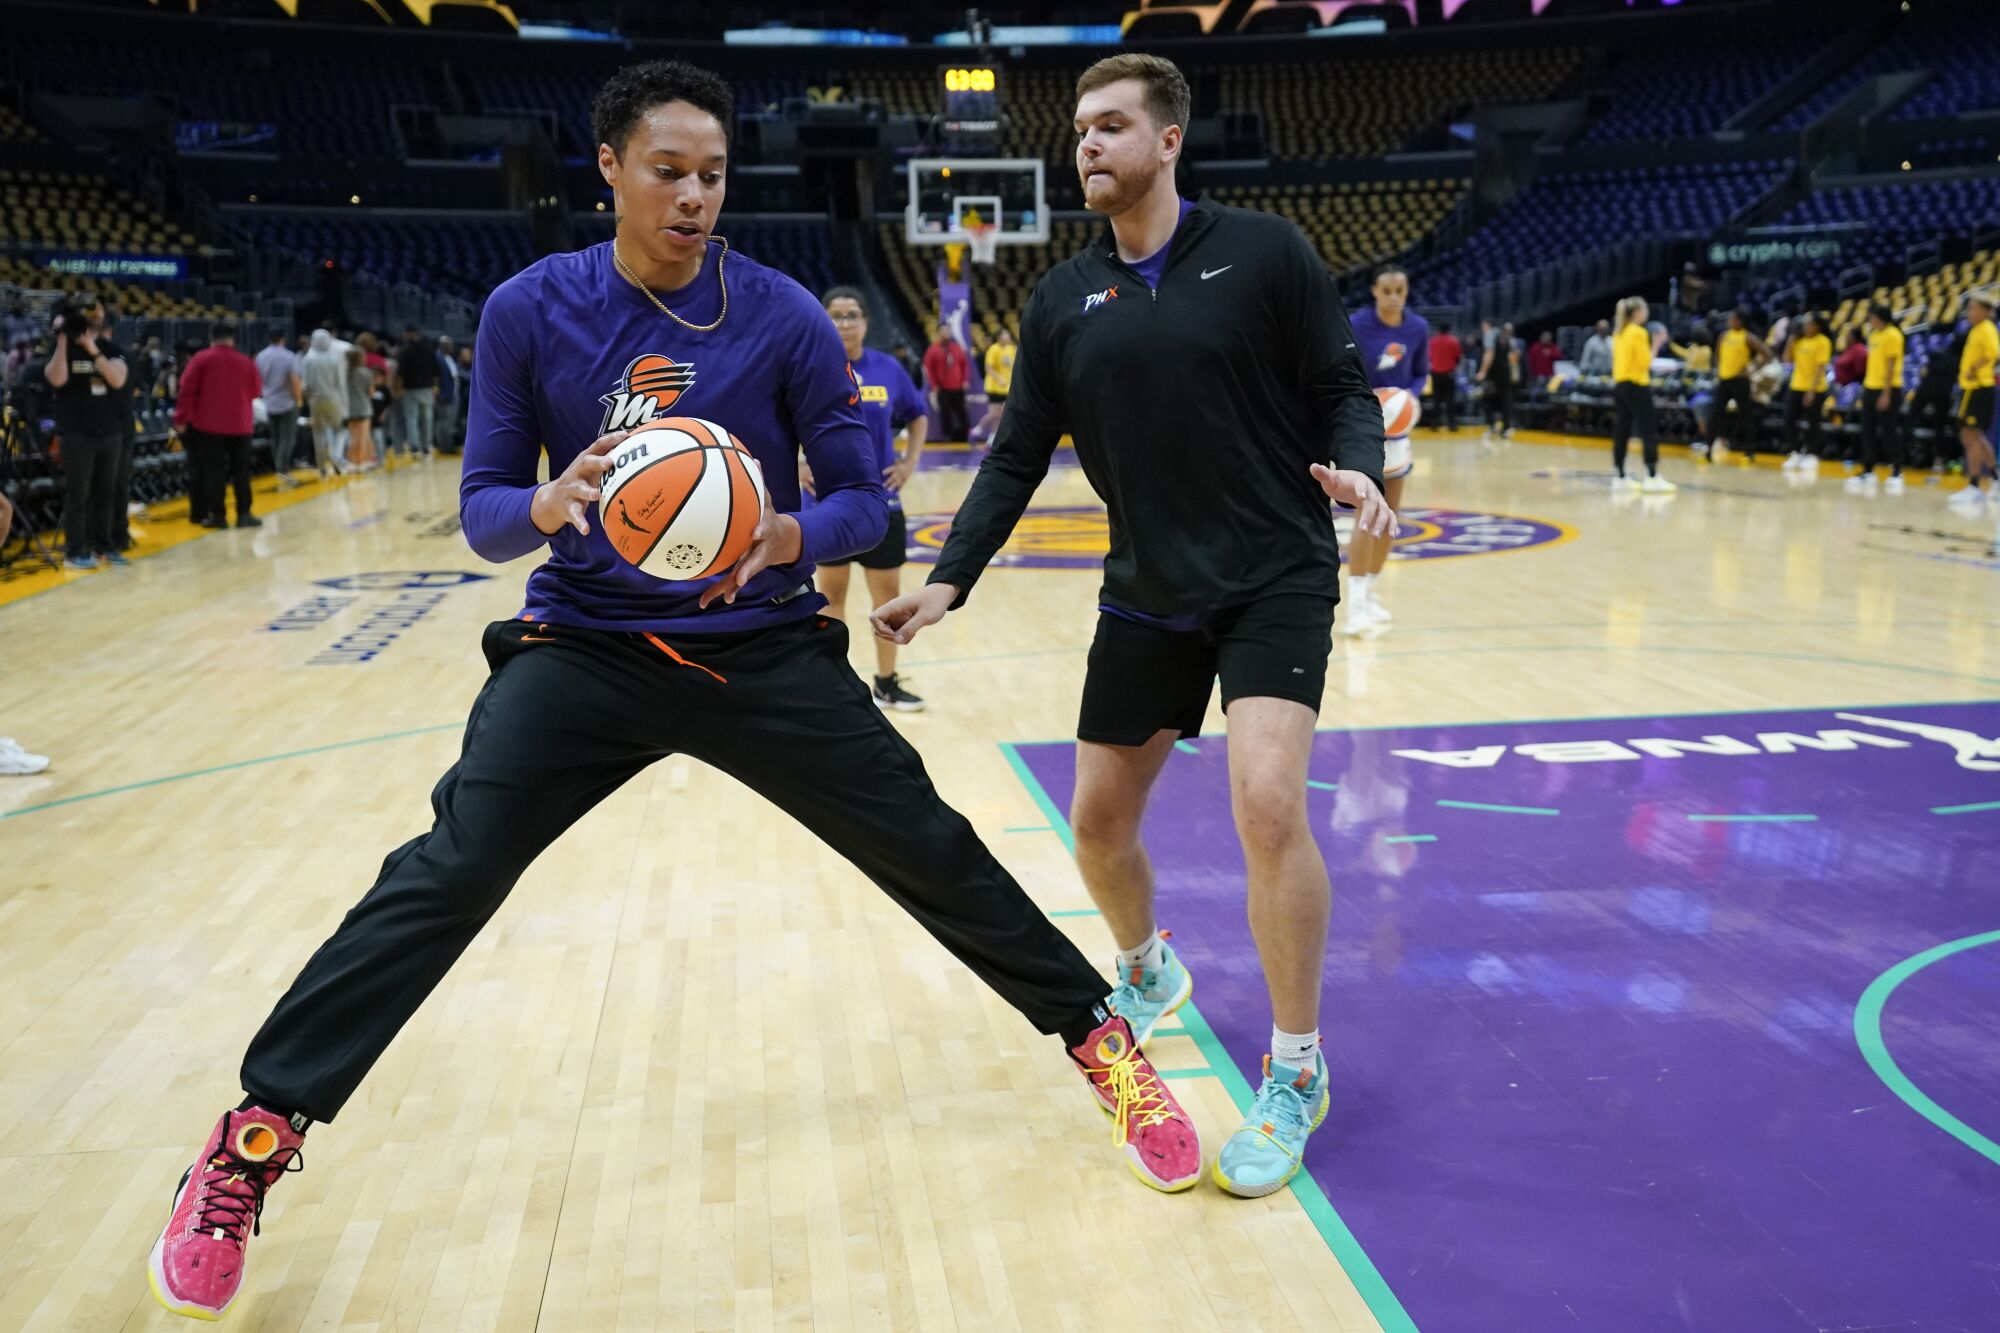 Phoenix Mercury center Brittney Griner holds the basketball while a staff member guards her during her pregame warm-up